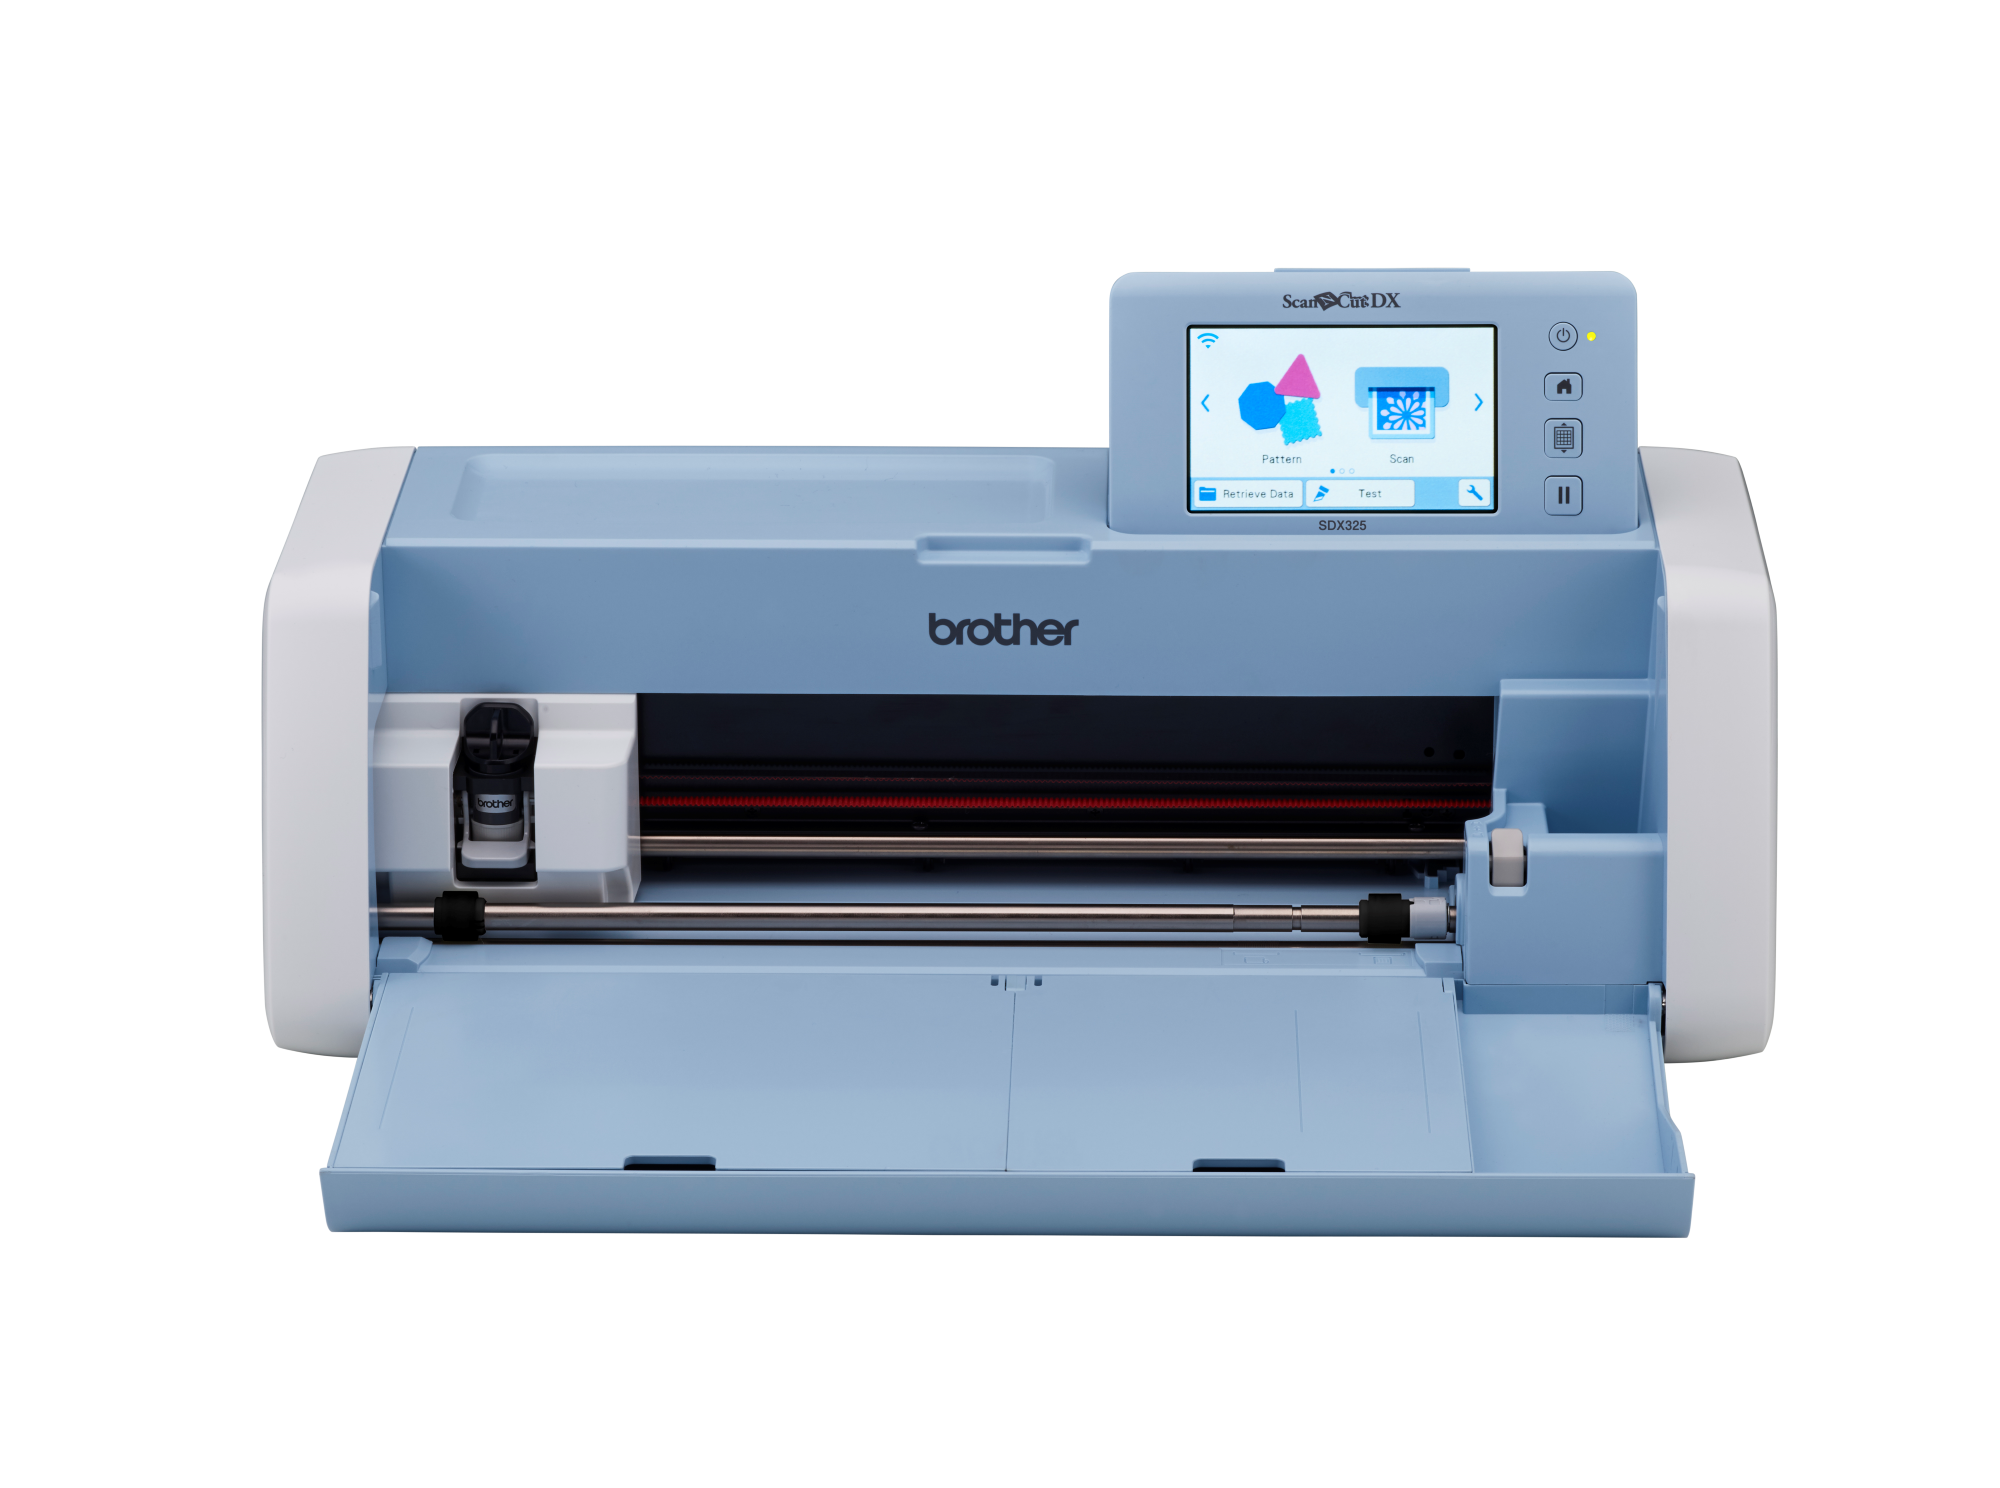 front facing image of the Brother SDX325 ScanNCut DX Innovis Edition while it is open